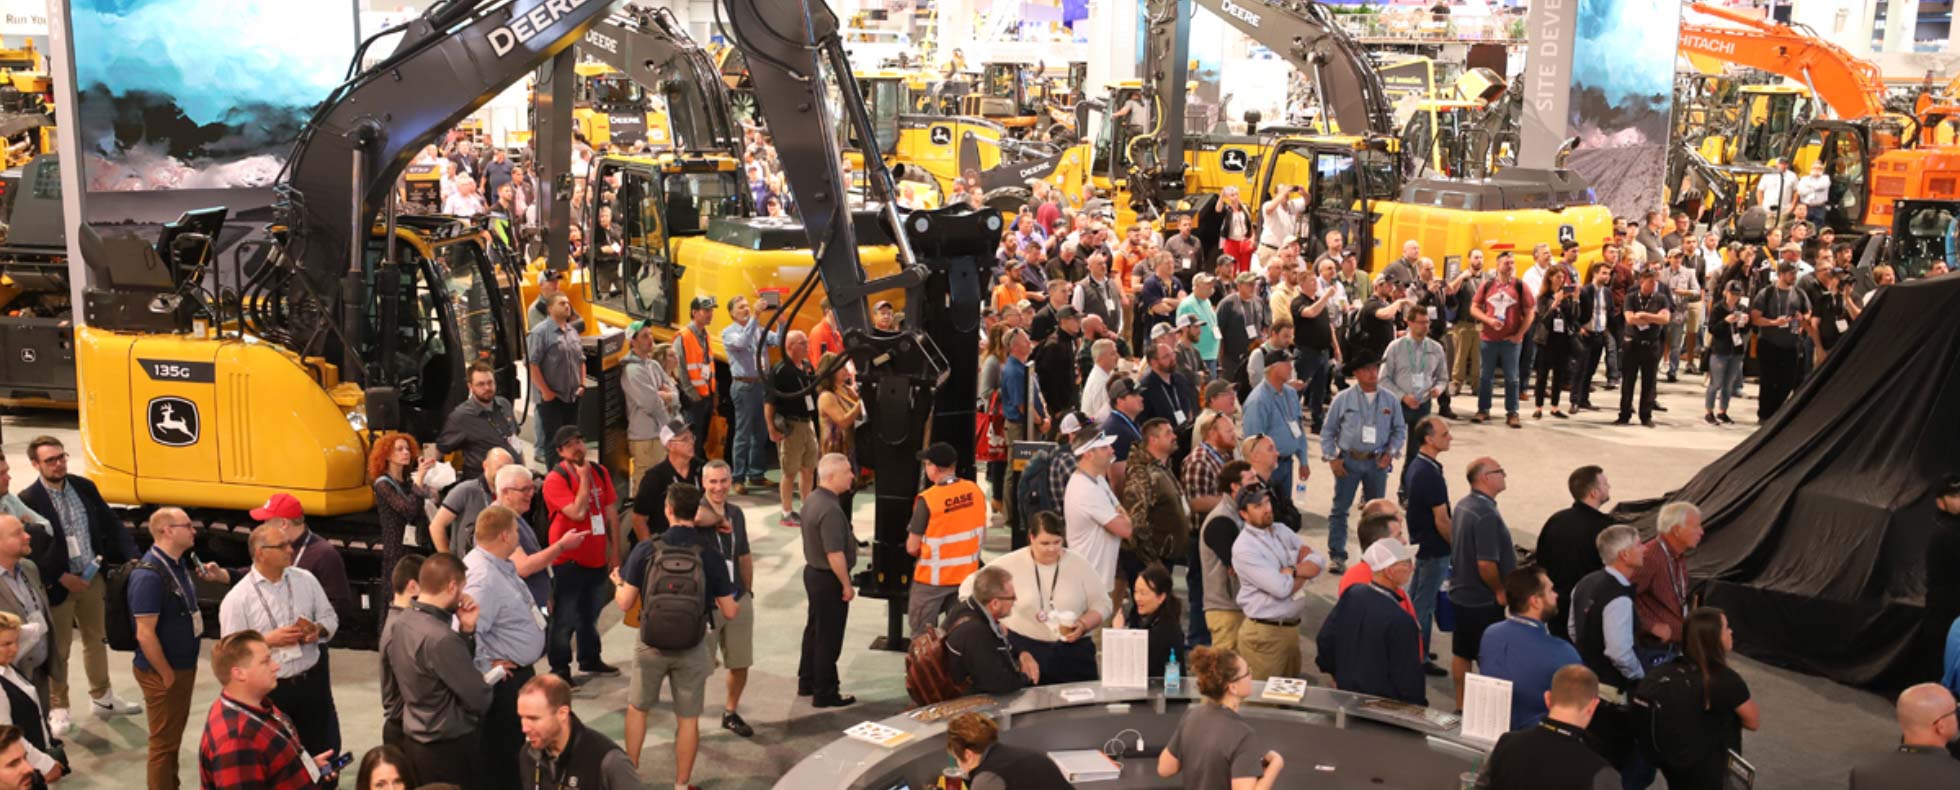 Highlights and Happenings from the Show Floor at CONEXPO-CON/AGG 2020